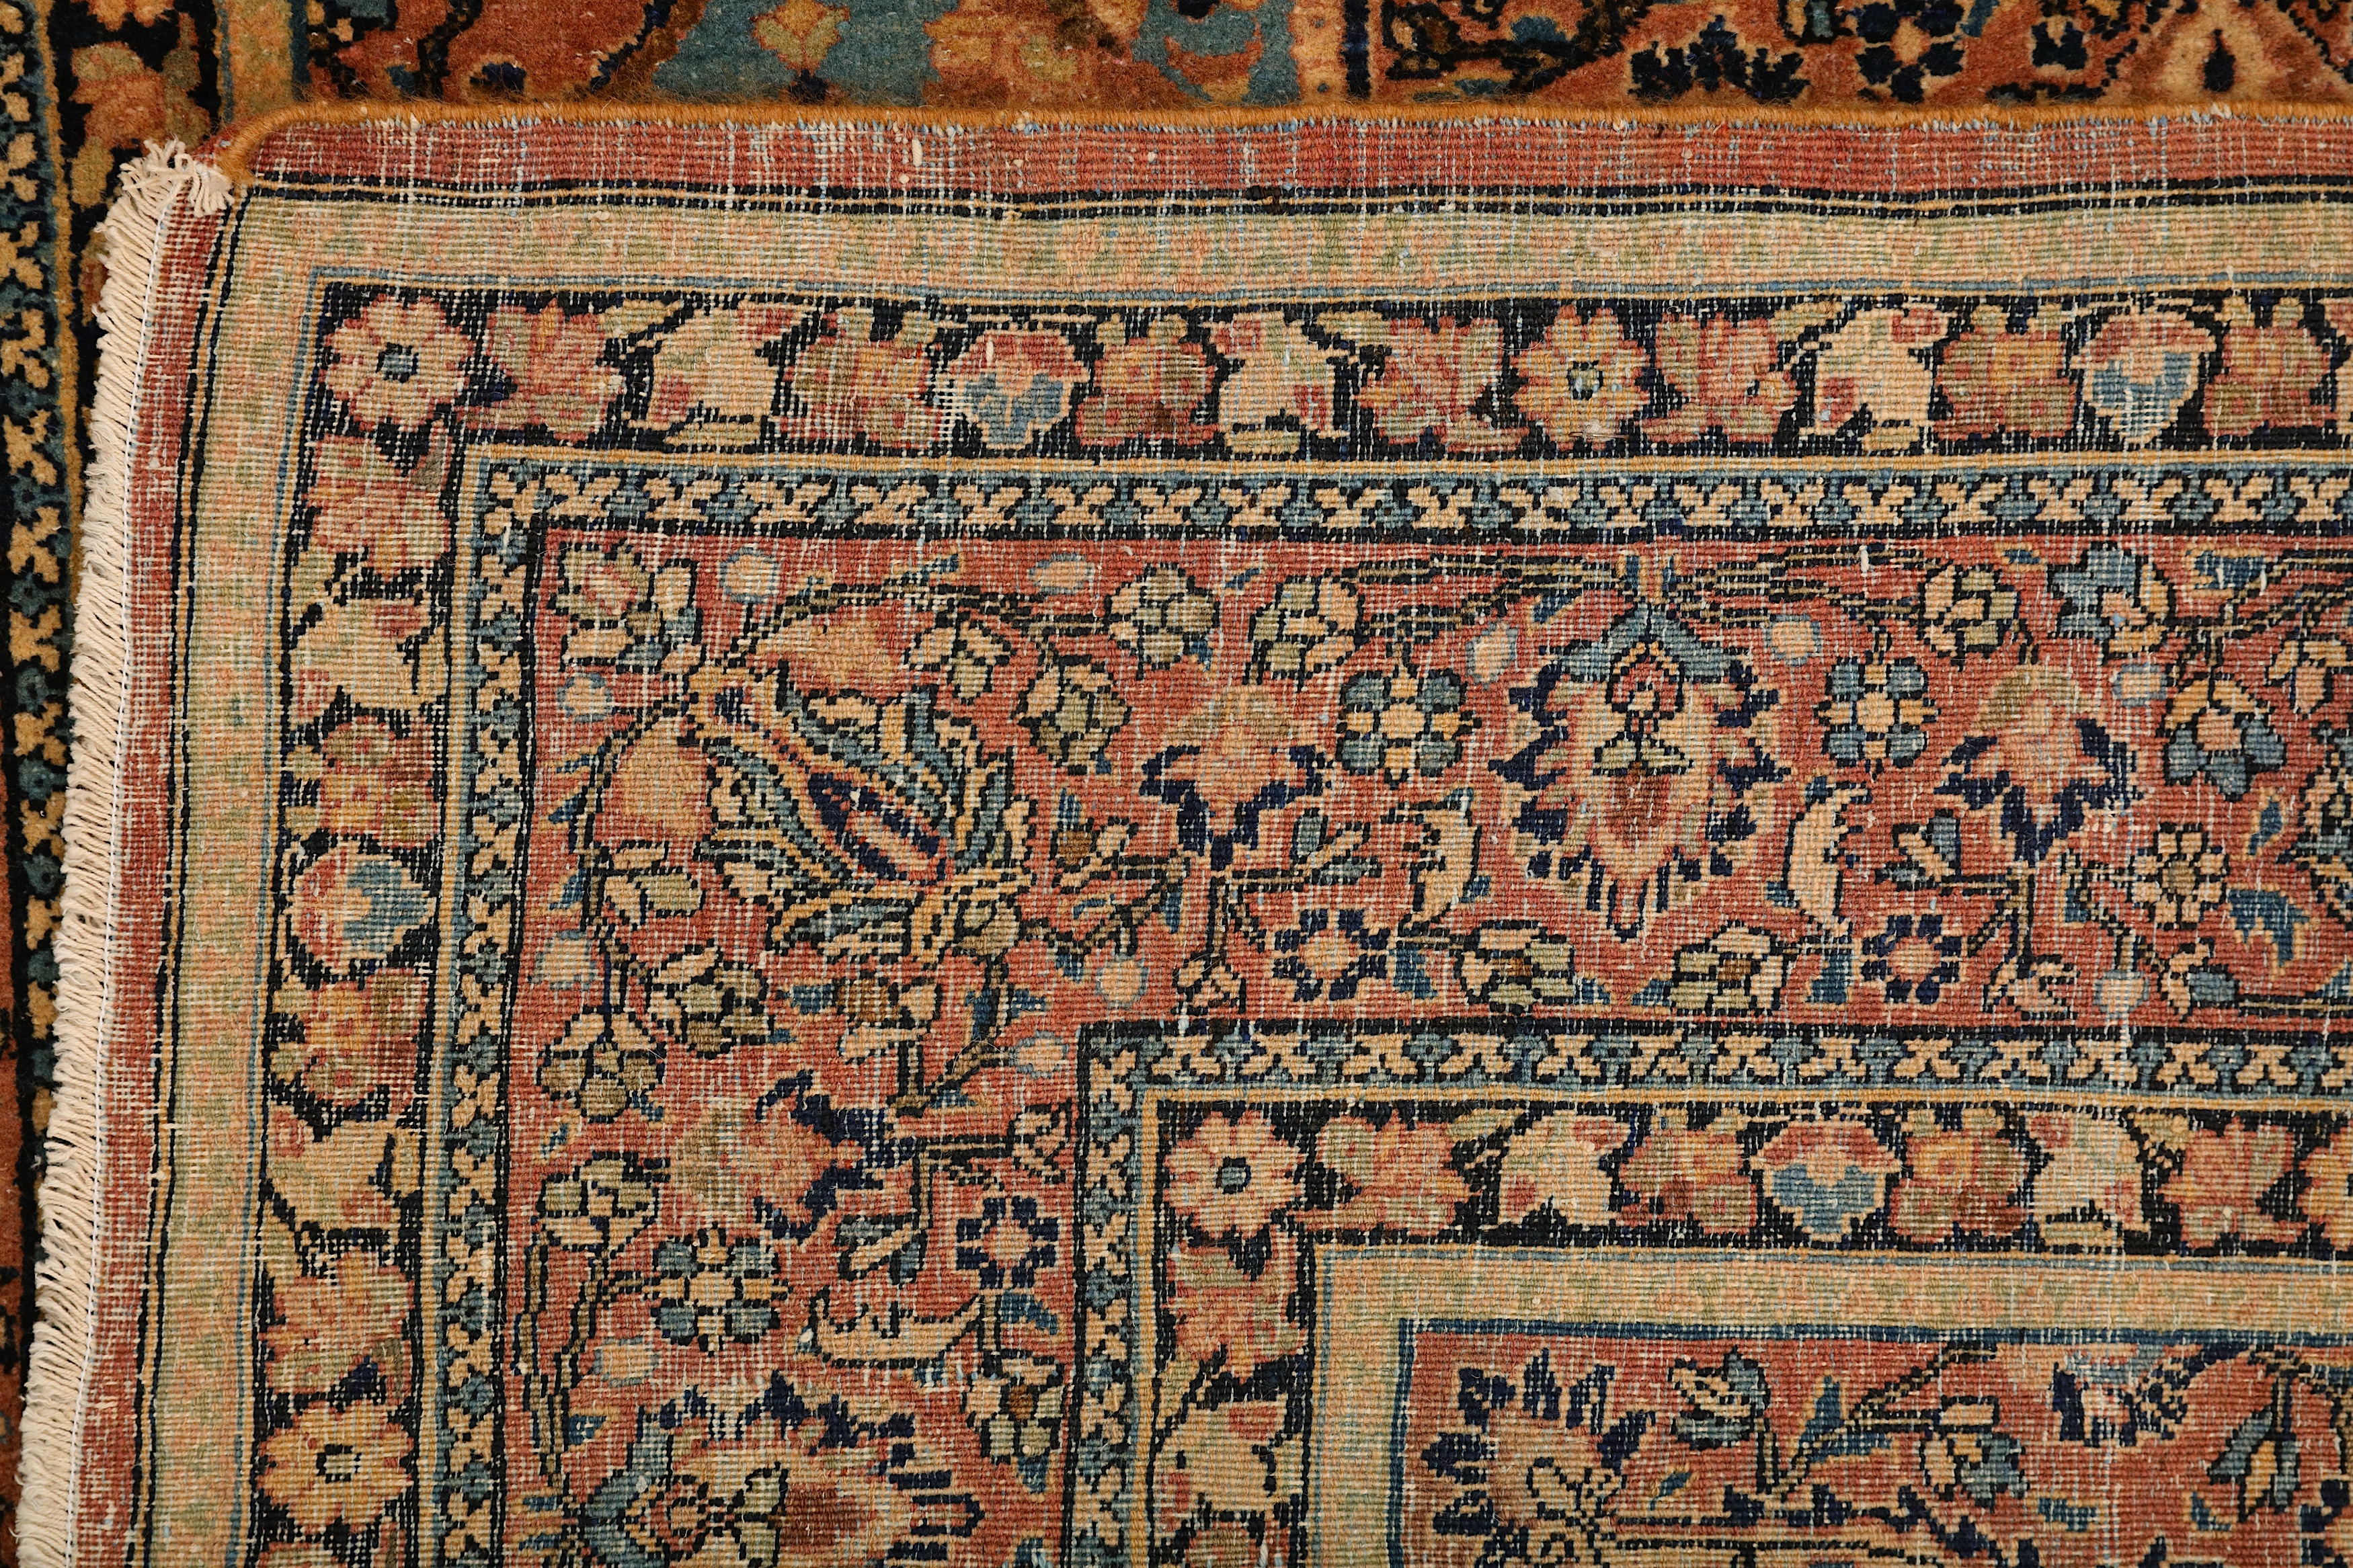 A VERY FINE ISFAHAN RUG, CENTRAL PERSIAN - Image 7 of 7